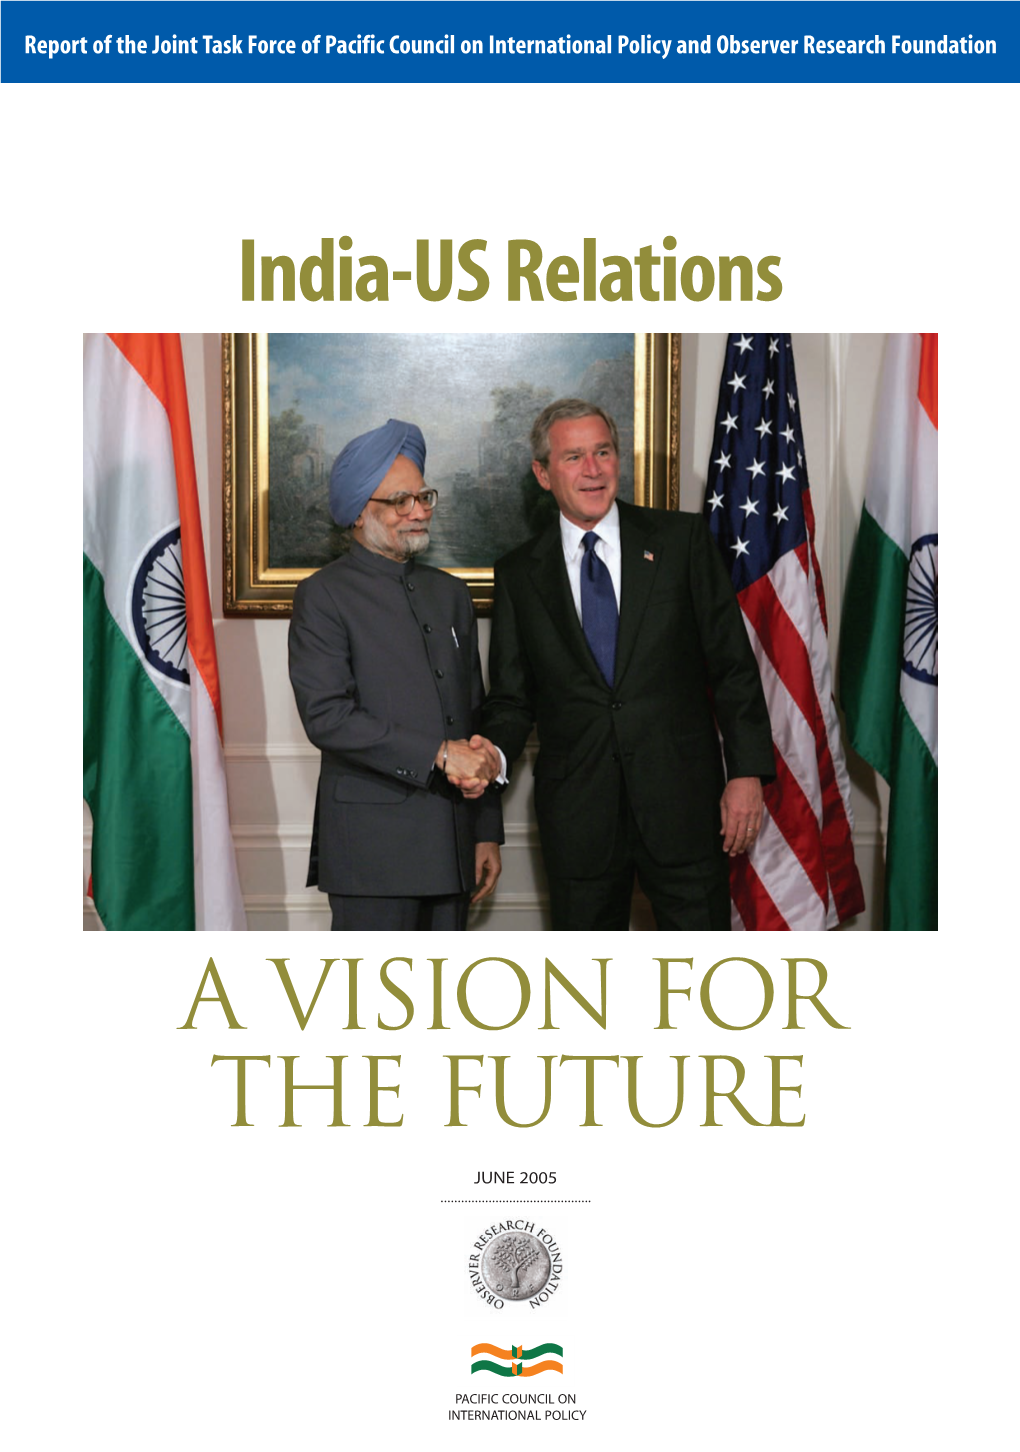 India-U.S. Relations: a Vision for the Future